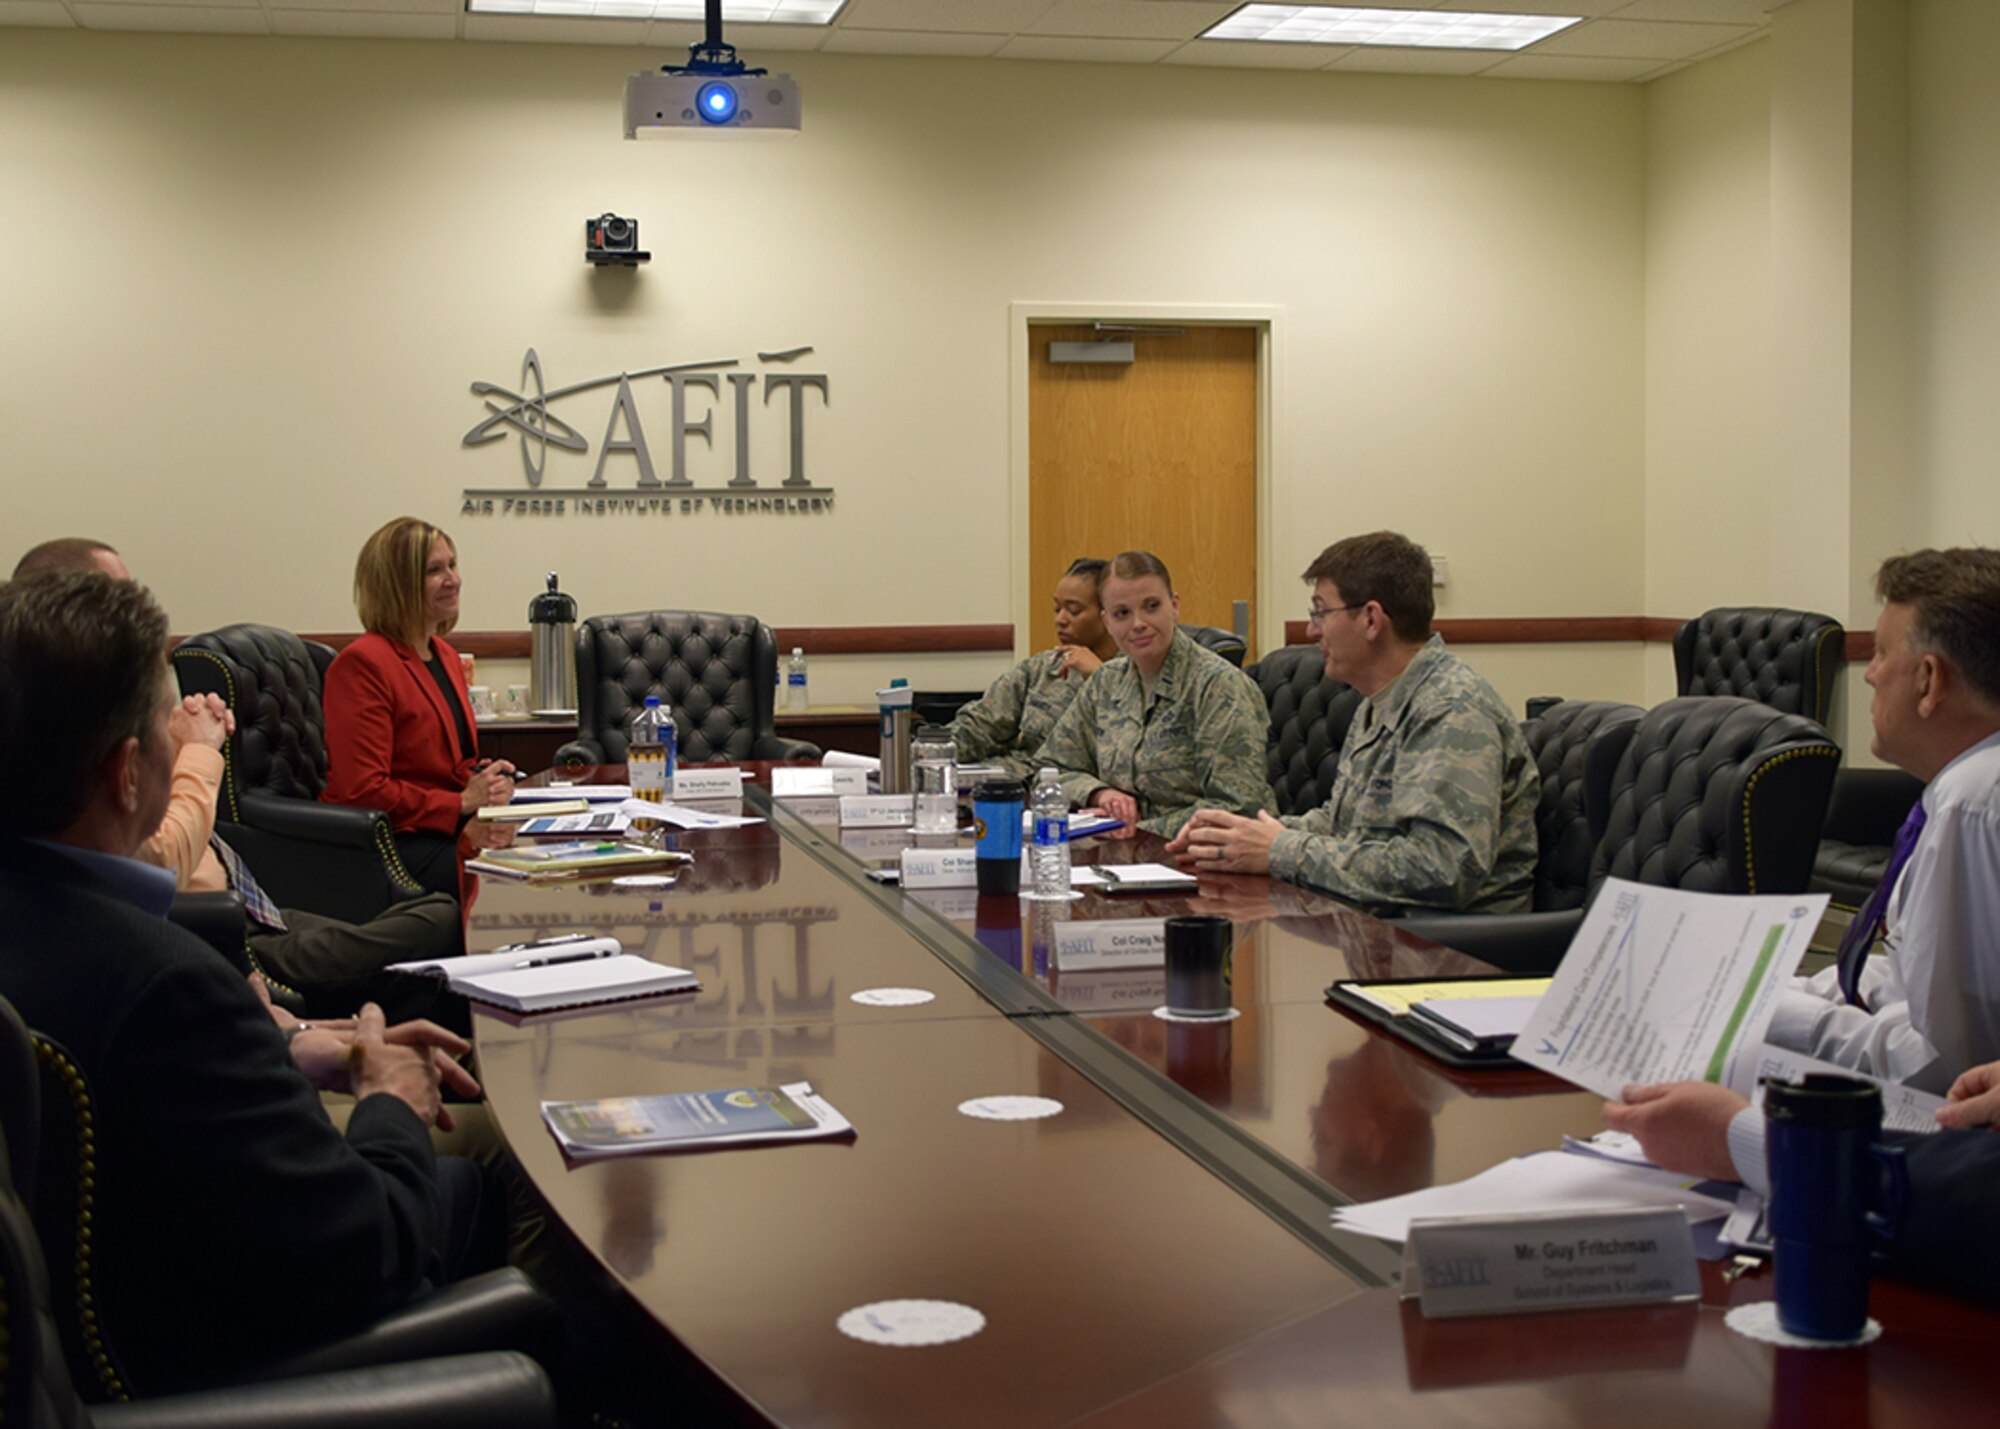 HQ AETC’s Continuum of Learning Engagement Team, Mrs. Shelly Petruska, Capt. Renee Cassidy and Lt. Jacqueline Crow, led a small group discussion with AFIT’s School of Systems and Logistics, Wright Patterson Air Force Base, Ohio, May 1, 2018.  The CoL engagement team is traveling to all AETC units to educate the command on CoL initiatives, and collect best practices, challenges and innovative ideas for CoL across the Air Force.